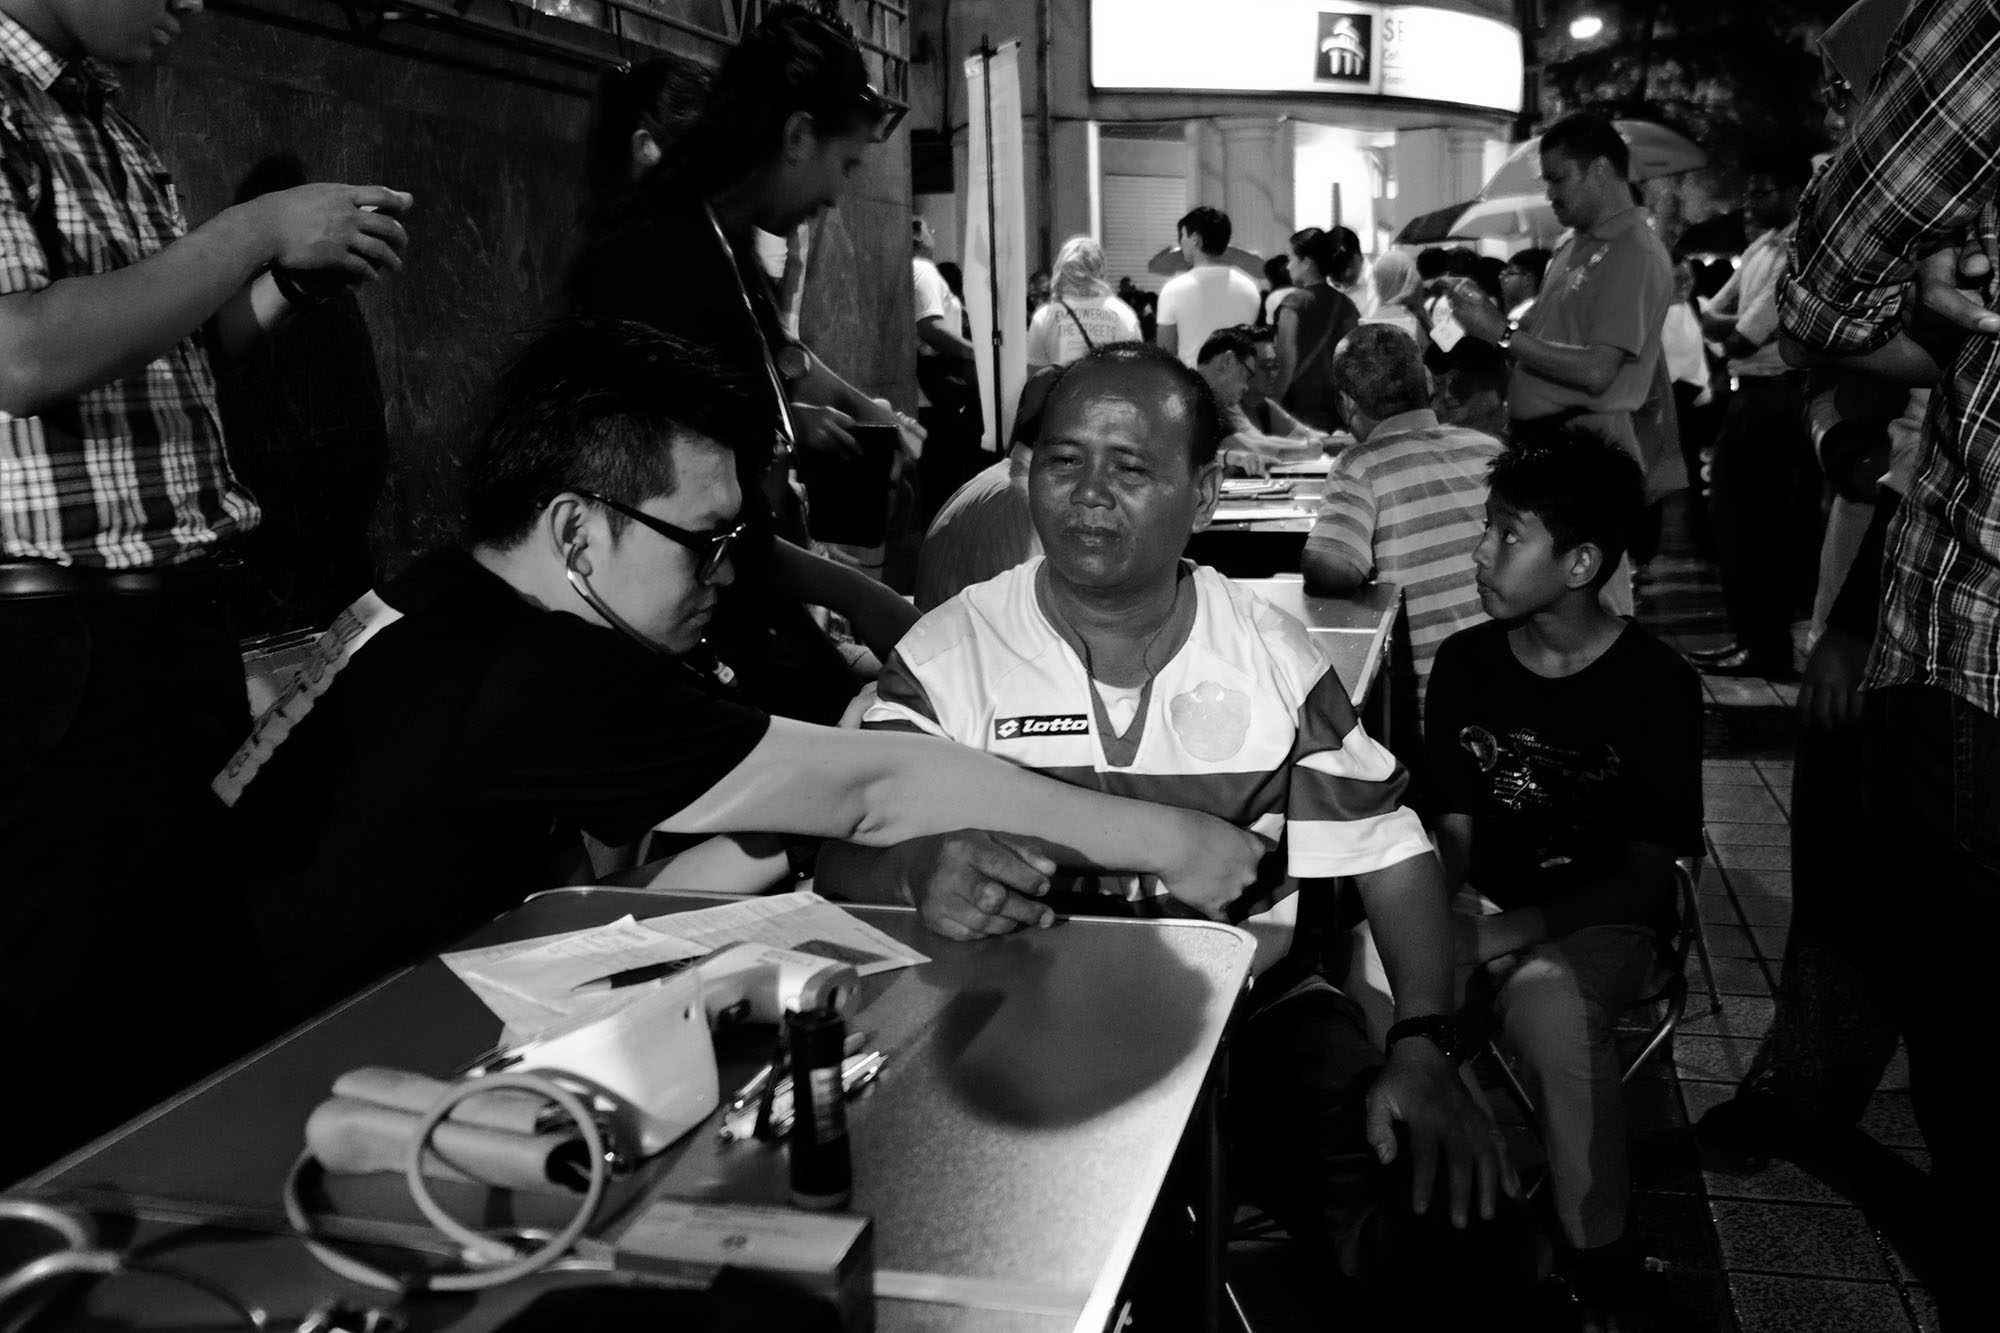 A volunteer dr checking blood pressure (Photo by Kamal Sellehuddin/Coconuts KL)